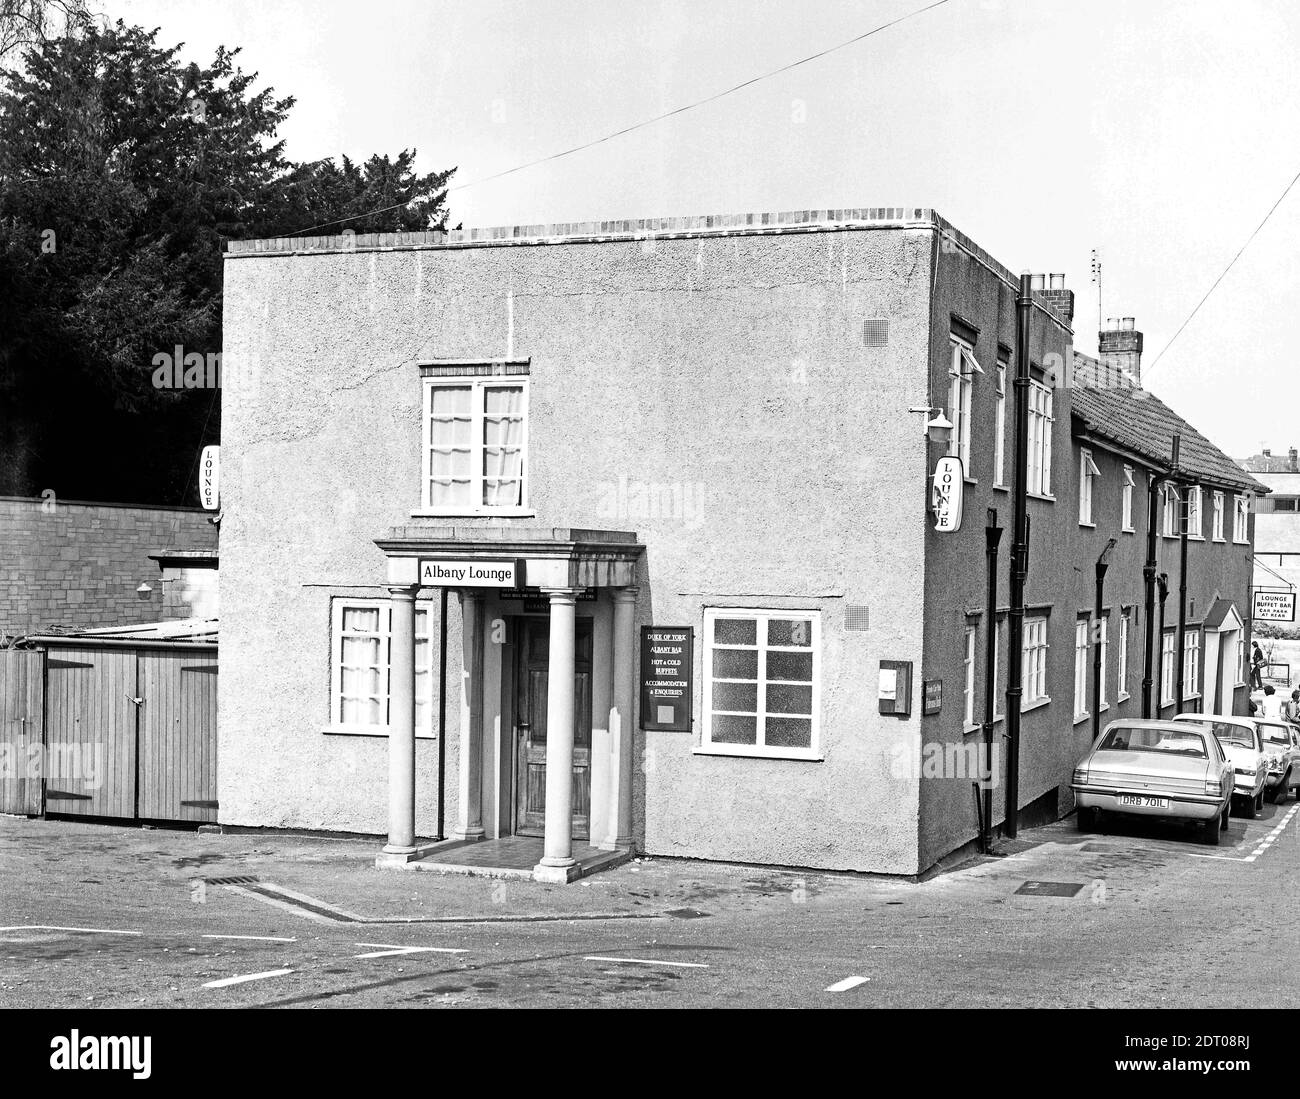 The Duke of York pub in Kingston, Yeovil. Photo taken in 1973. The main pub (see photos b and c) on the main road, was rebuilt in 1905 but this later rear elevation is more box-like. The sign over the door is for The Albany Lounge whereas the menu board advertises the Albany Bar and the perspex hanging sign has been smashed. The gallows sign on the front corner is for 'Lounge, Buffet Bar Car Park at Rear.' There is no brewery signage visible however photos c and d (maybe taken later as on 35mm negatives) show a Bass gallows sign. The nearest car is a Cortina, registration DRB 701L. No0085 Stock Photo